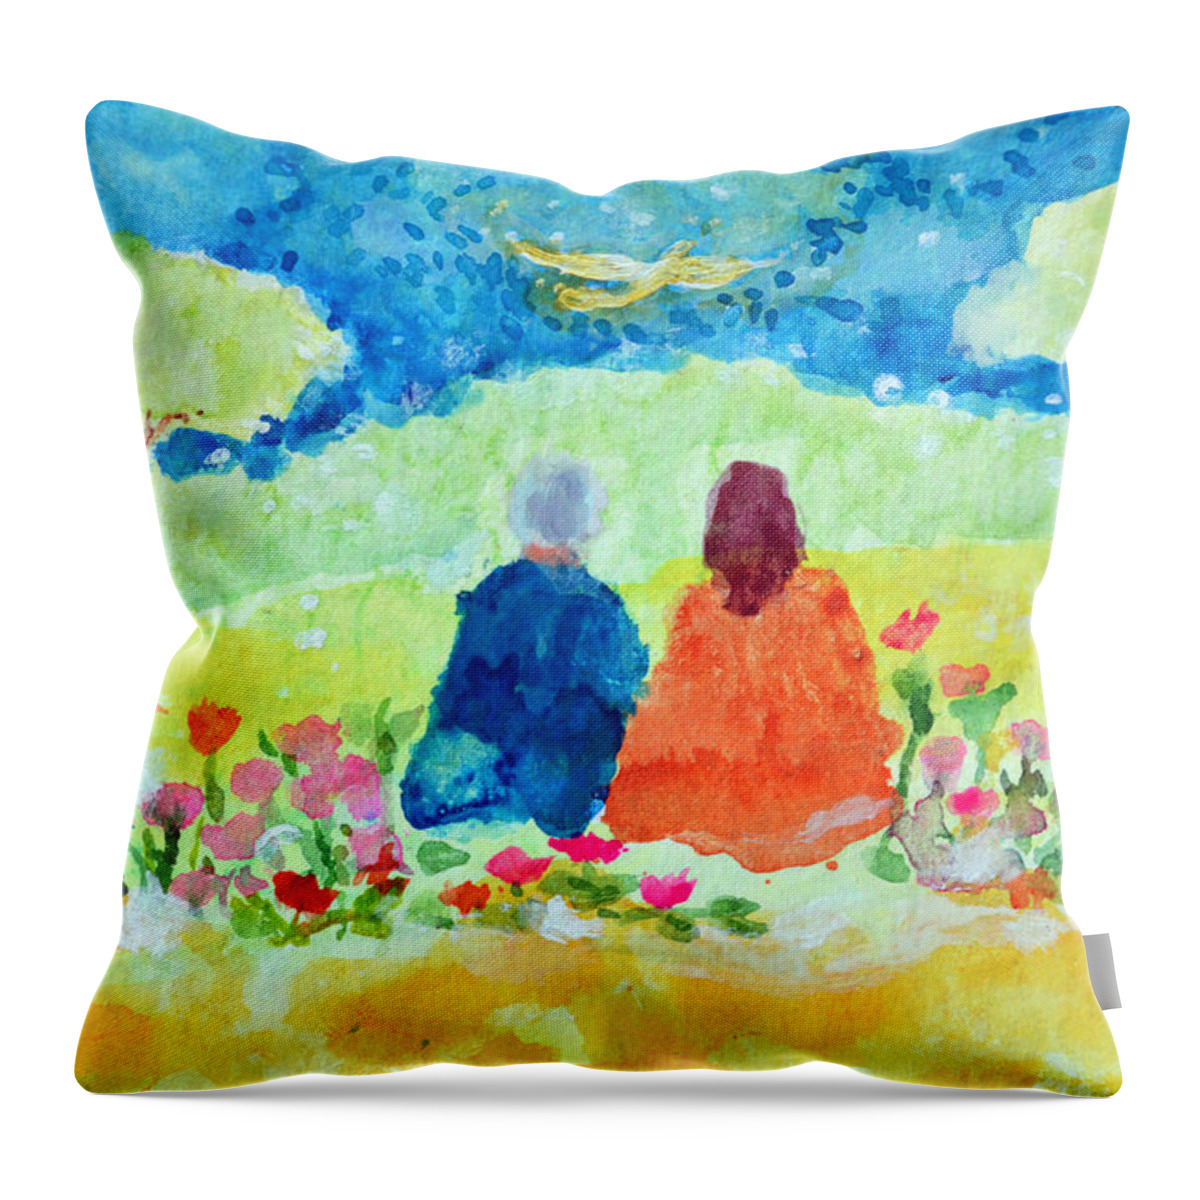  Throw Pillow featuring the painting Yogananda and Swami Kriyananda #1 by Ashleigh Dyan Bayer